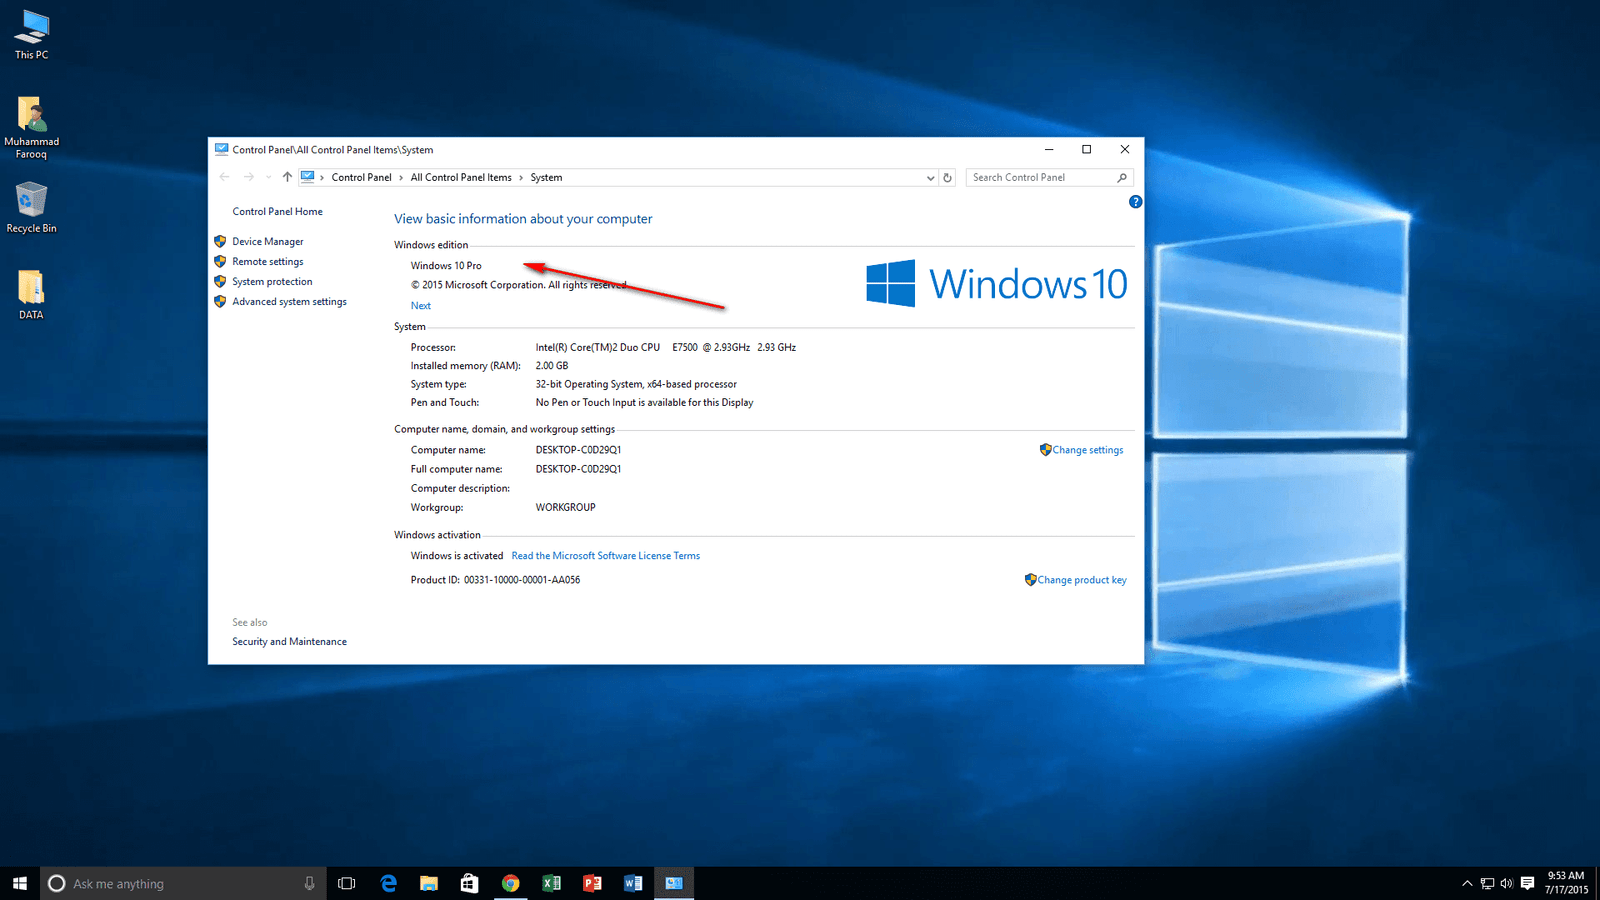 Windows 10 available 01